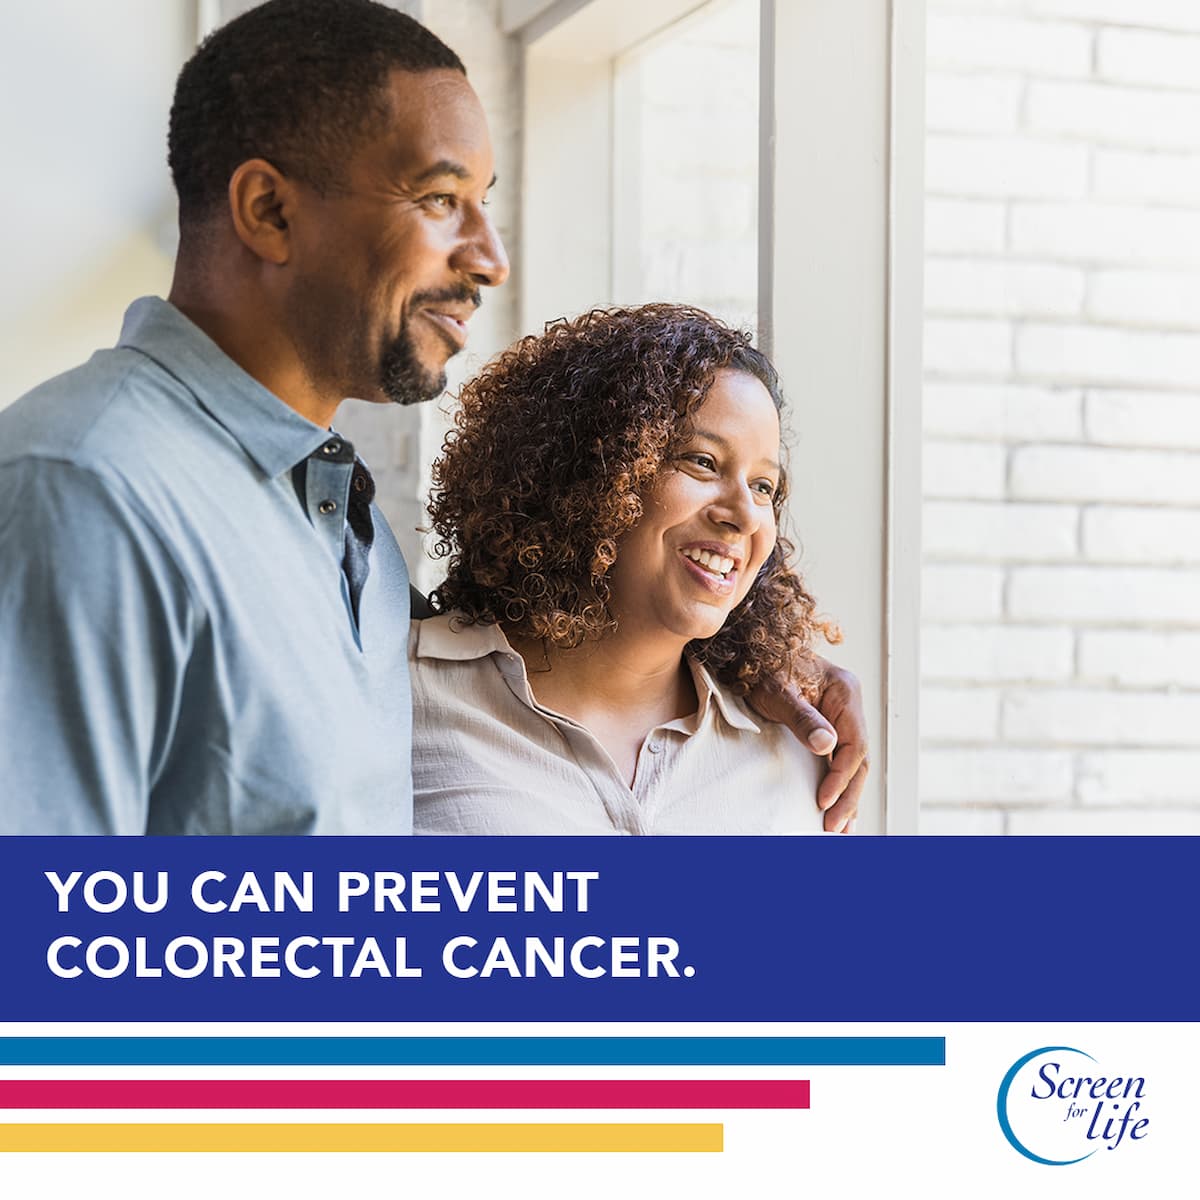 You can prevent colorectal cancer.